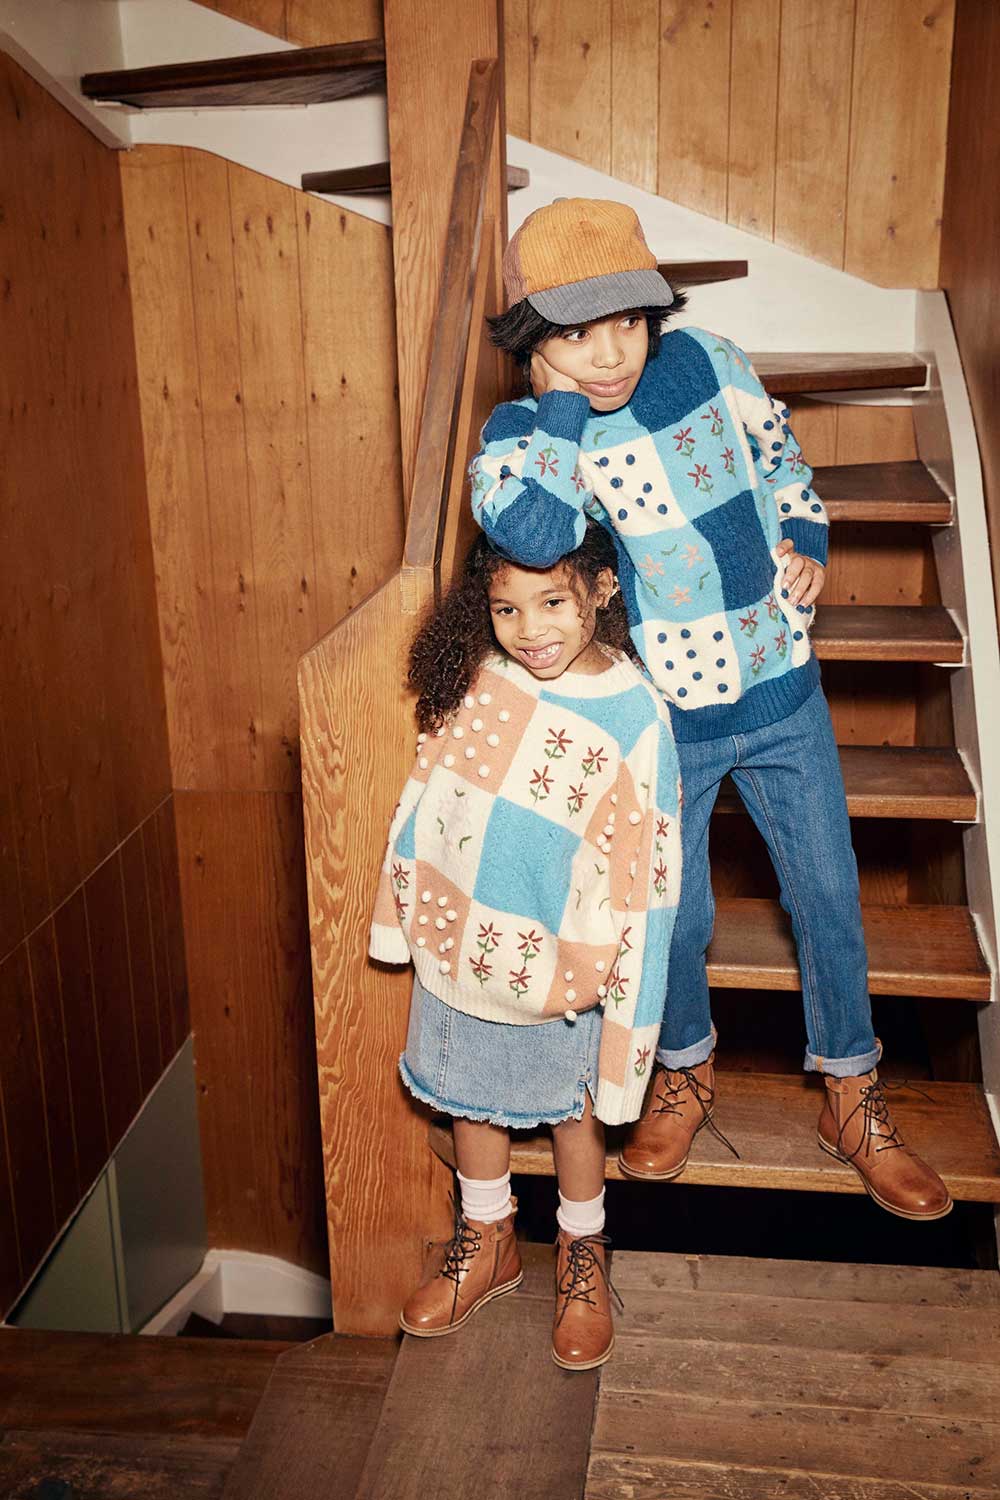 A young boy and girl stood on a wooden staircase